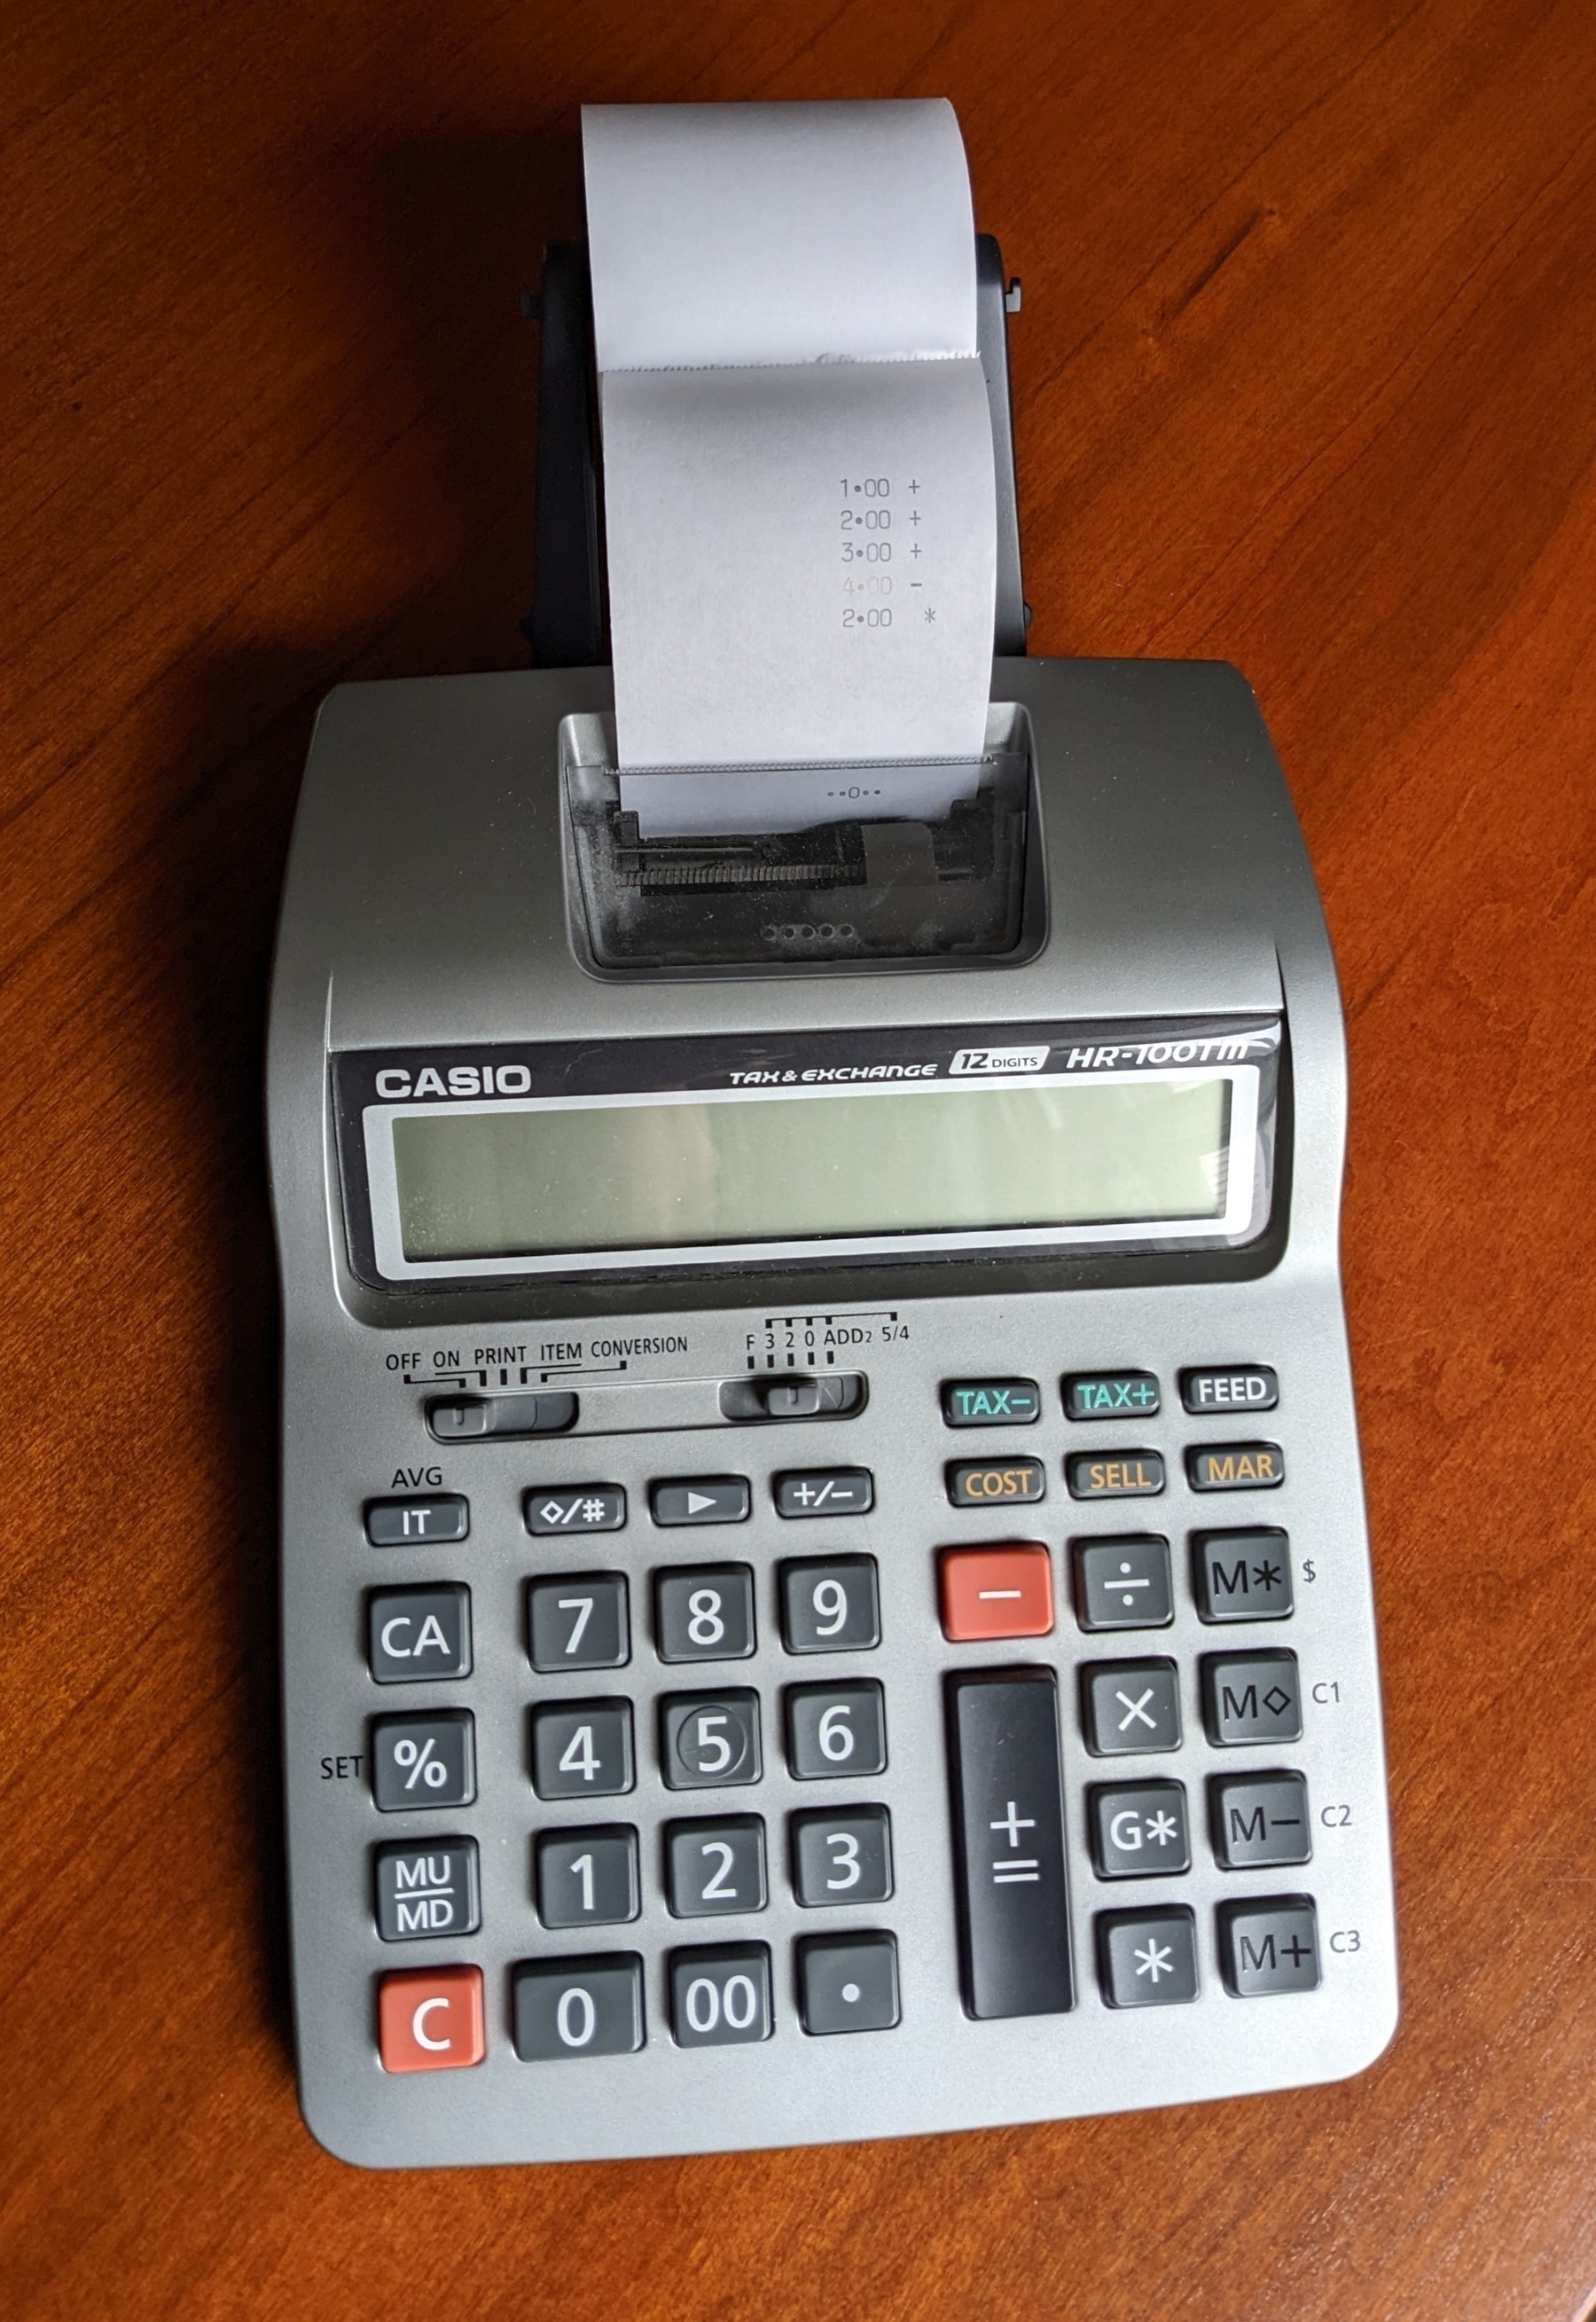 adding machine with the equation described above, printed on the tape